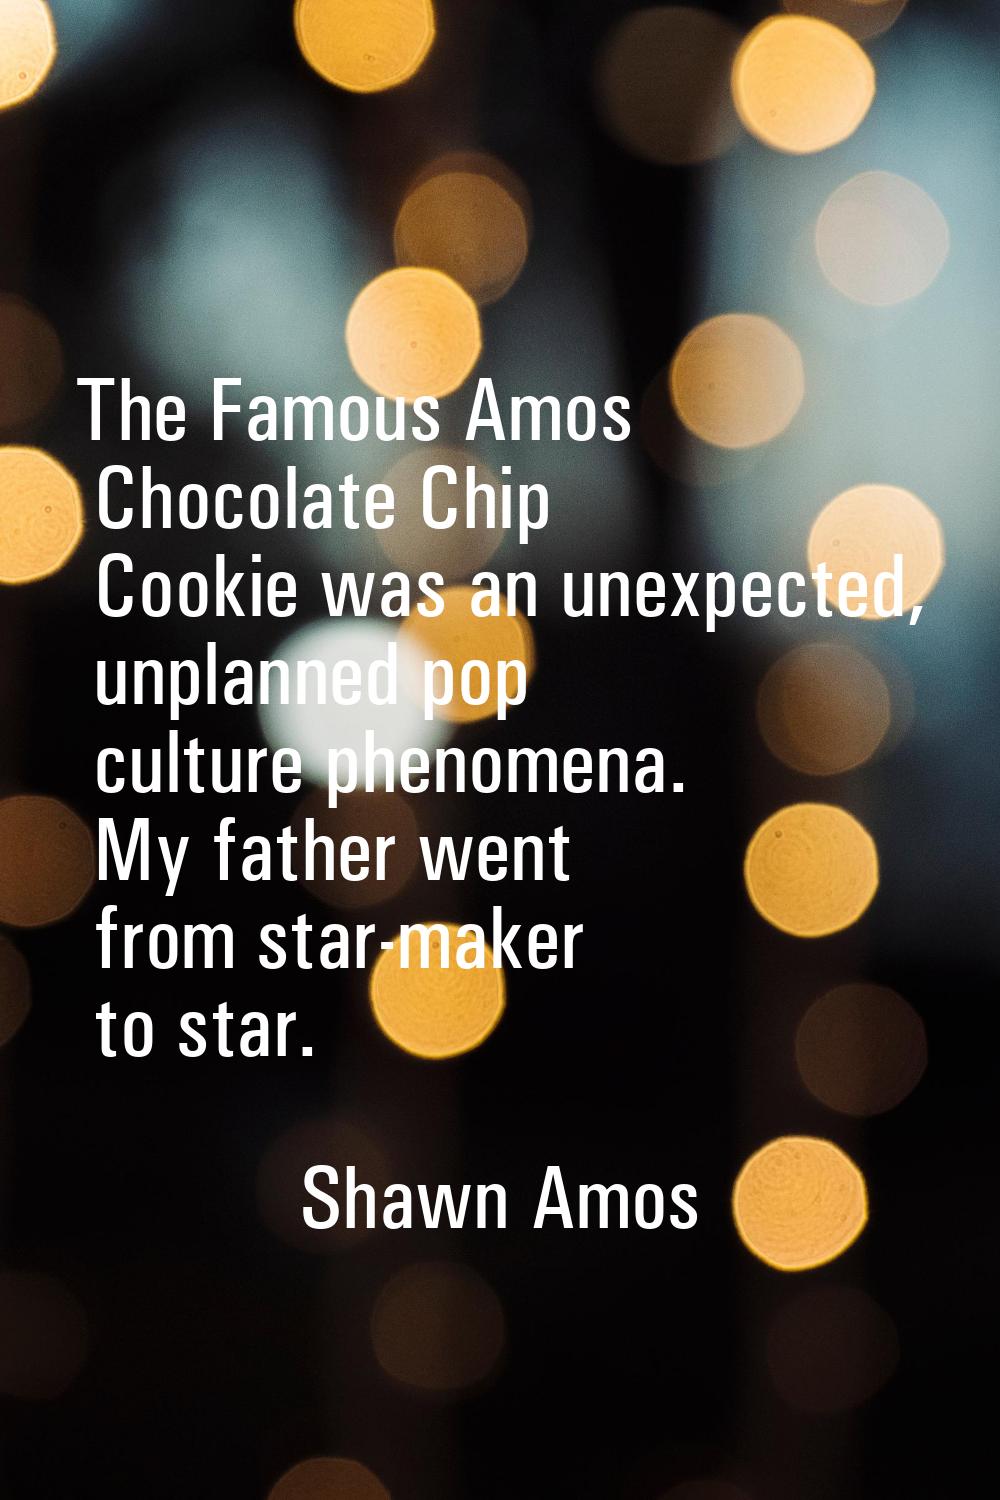 The Famous Amos Chocolate Chip Cookie was an unexpected, unplanned pop culture phenomena. My father